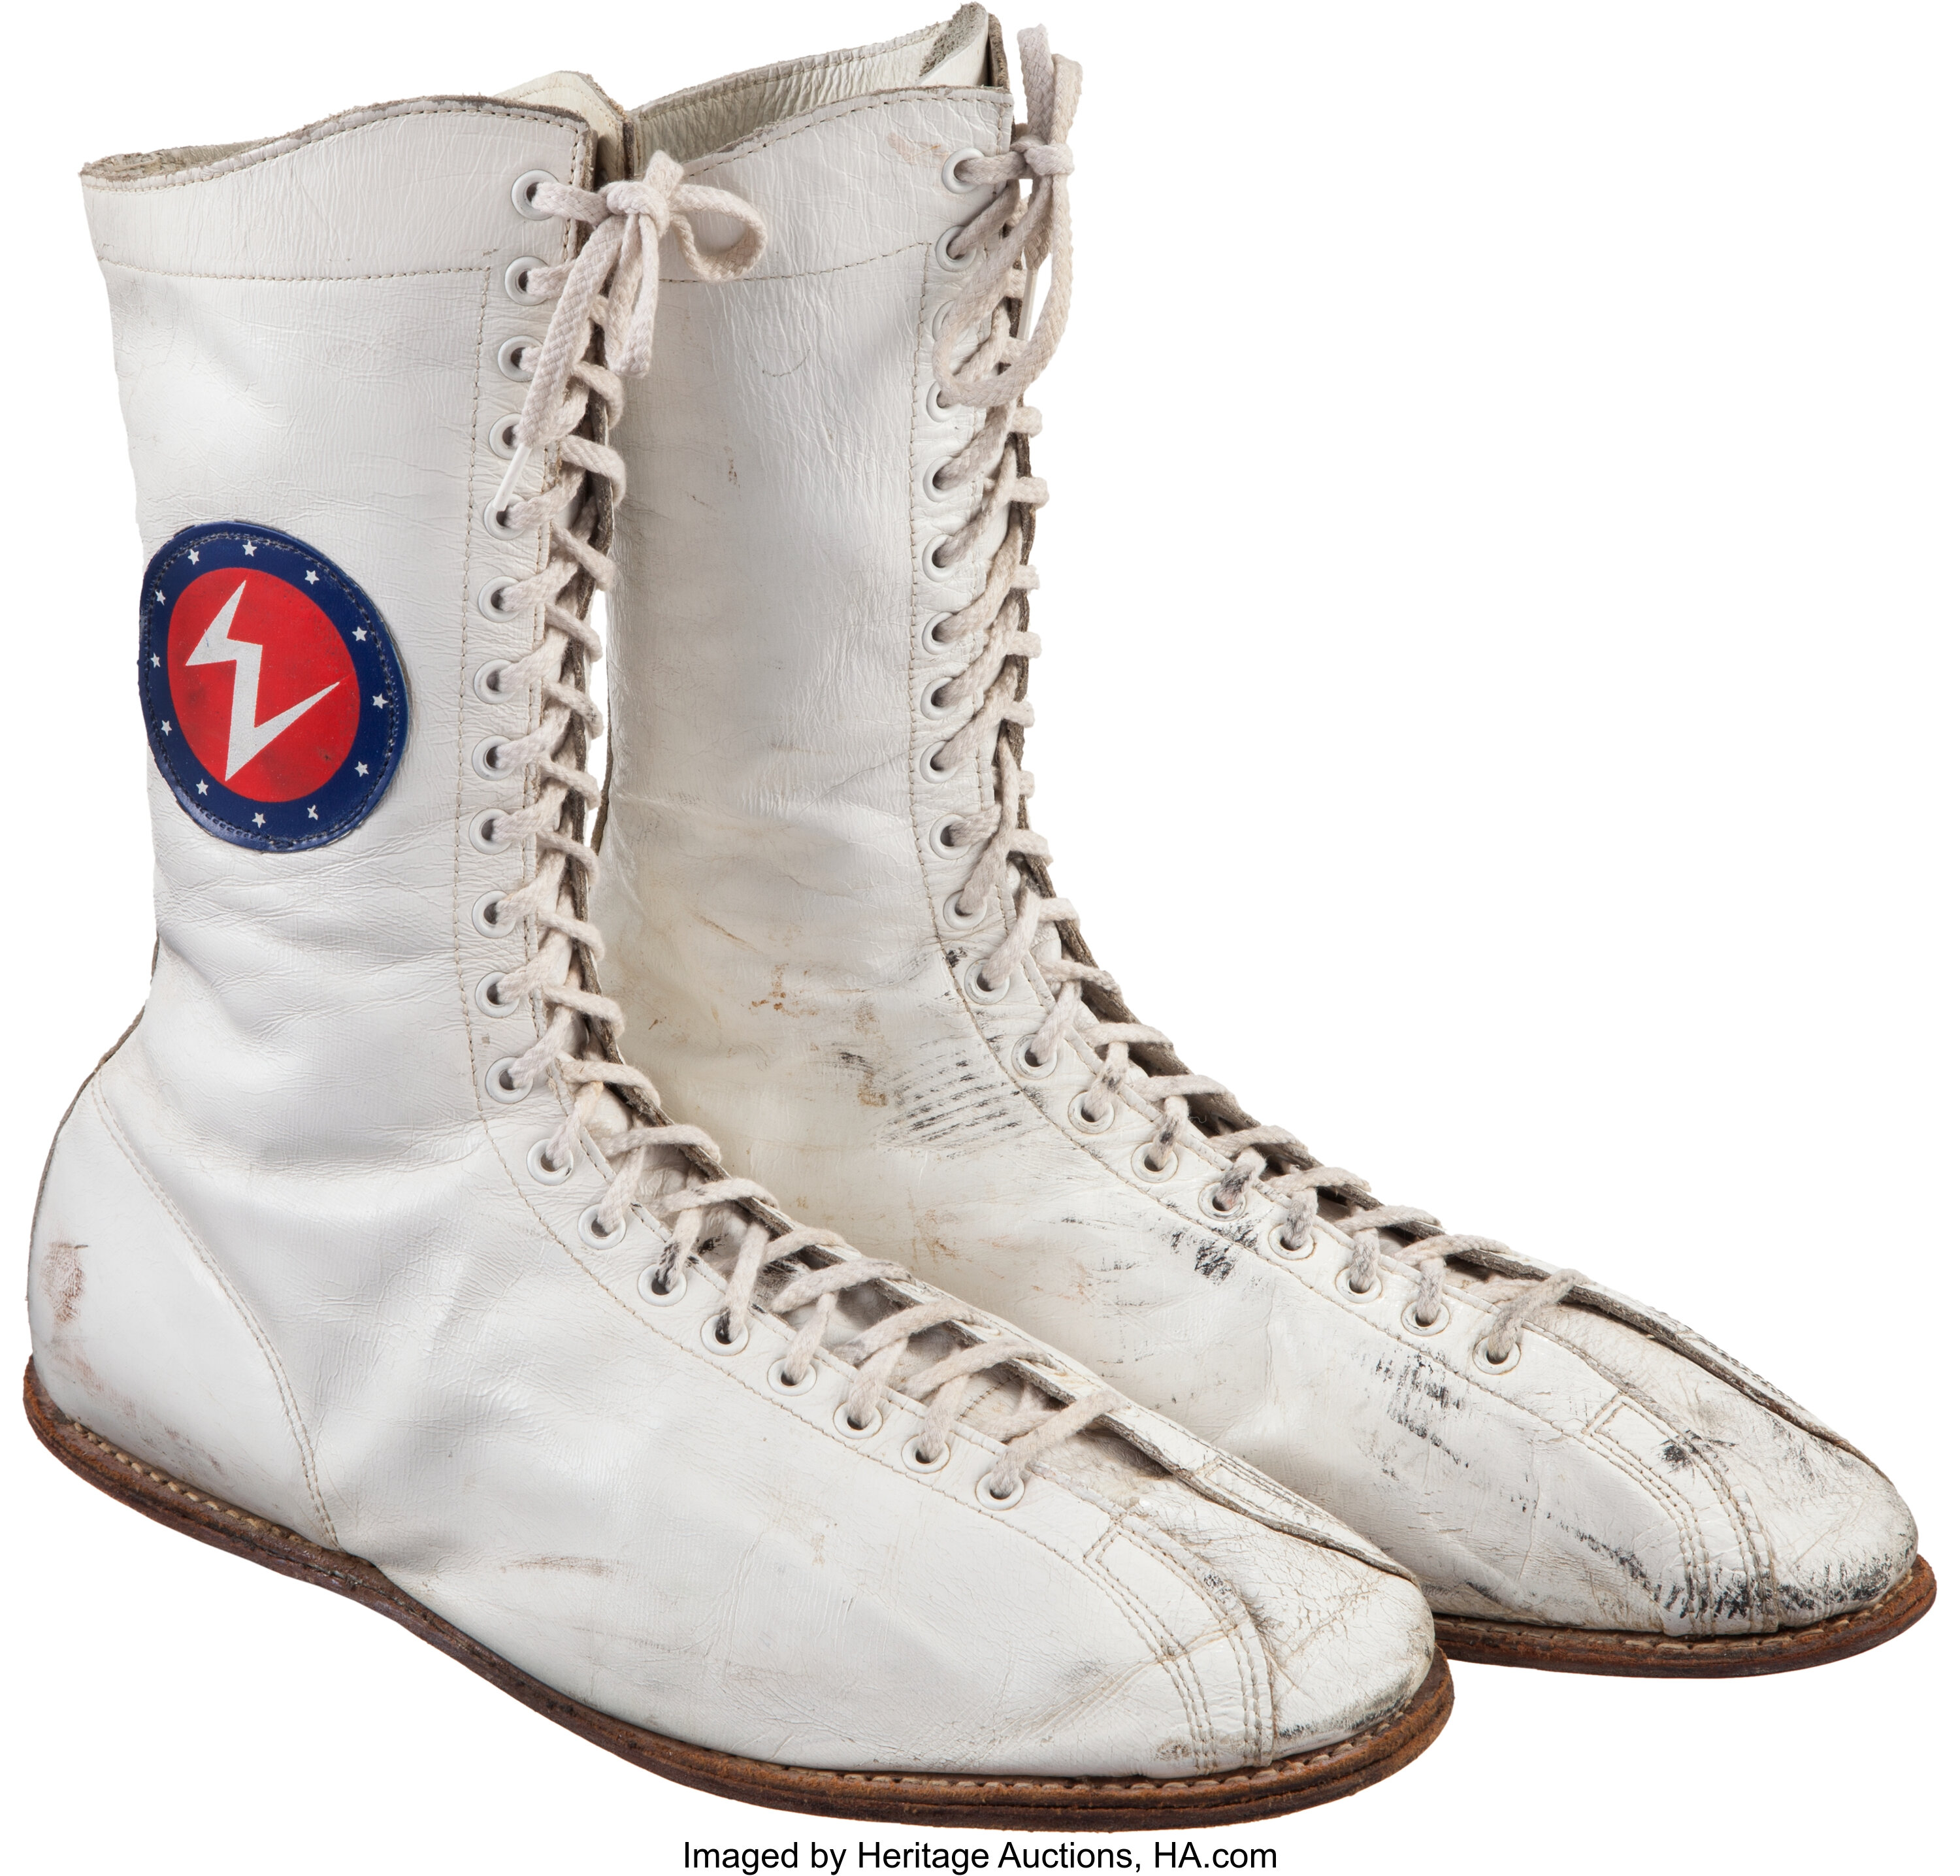 1975 Muhammad Ali Fight Worn Shoes from Chuck Wepner Bout.... | Lot #50042  | Heritage Auctions